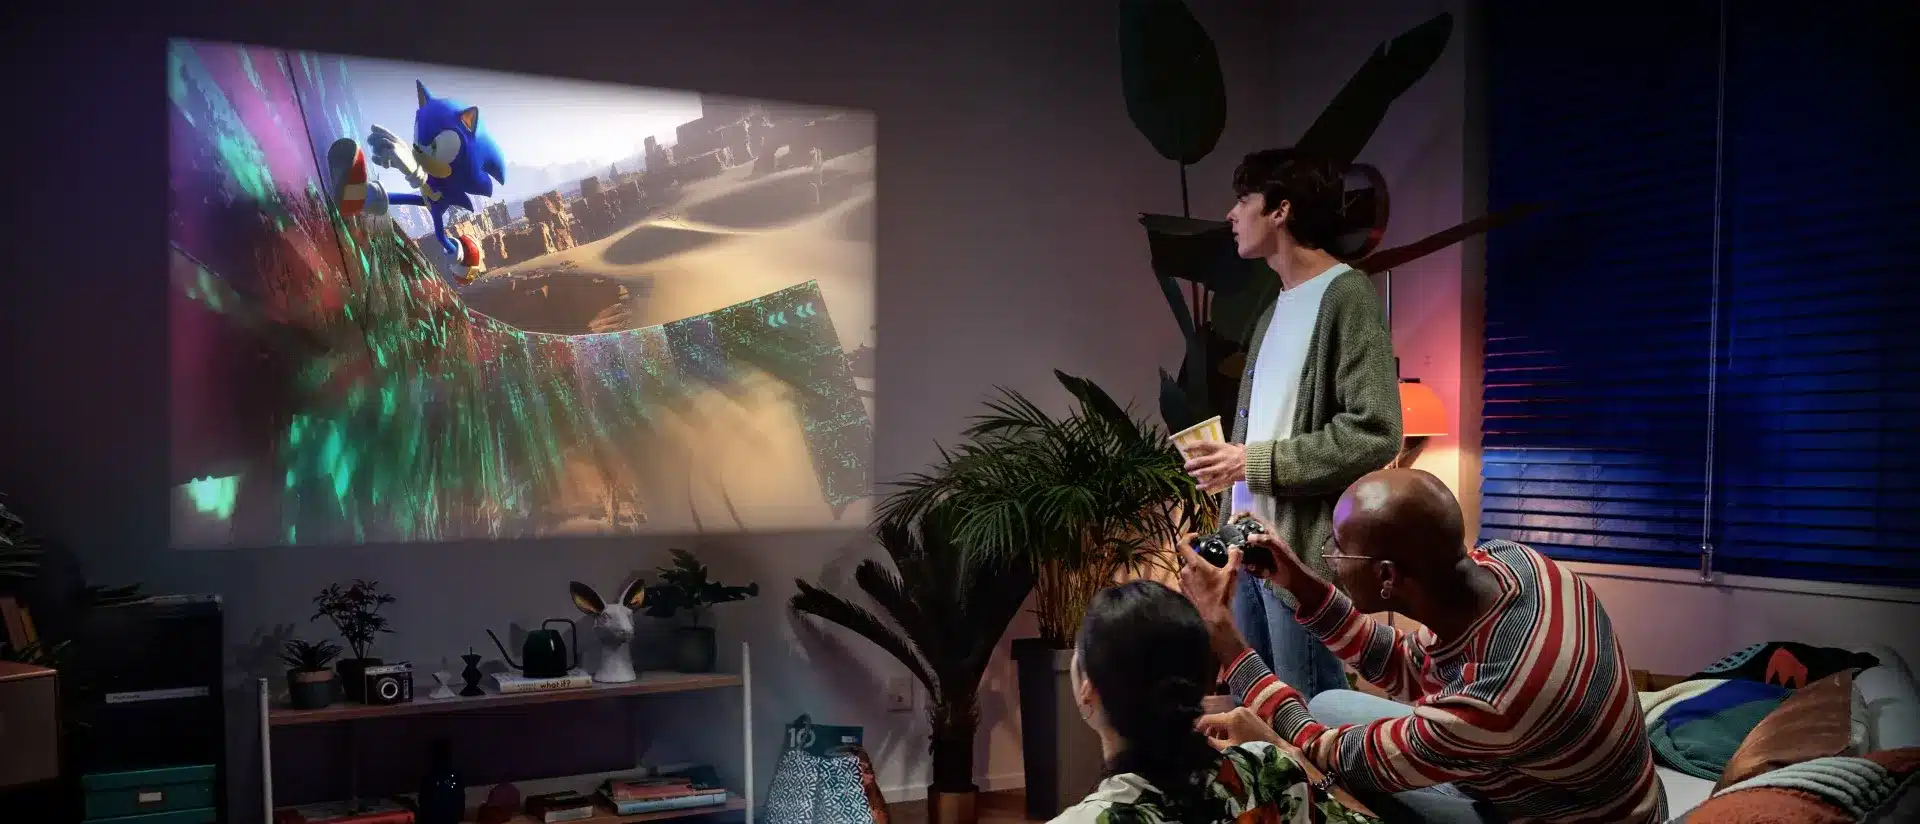 samsung freestyle 2 projector with cloud gaming projecting games onto the wall